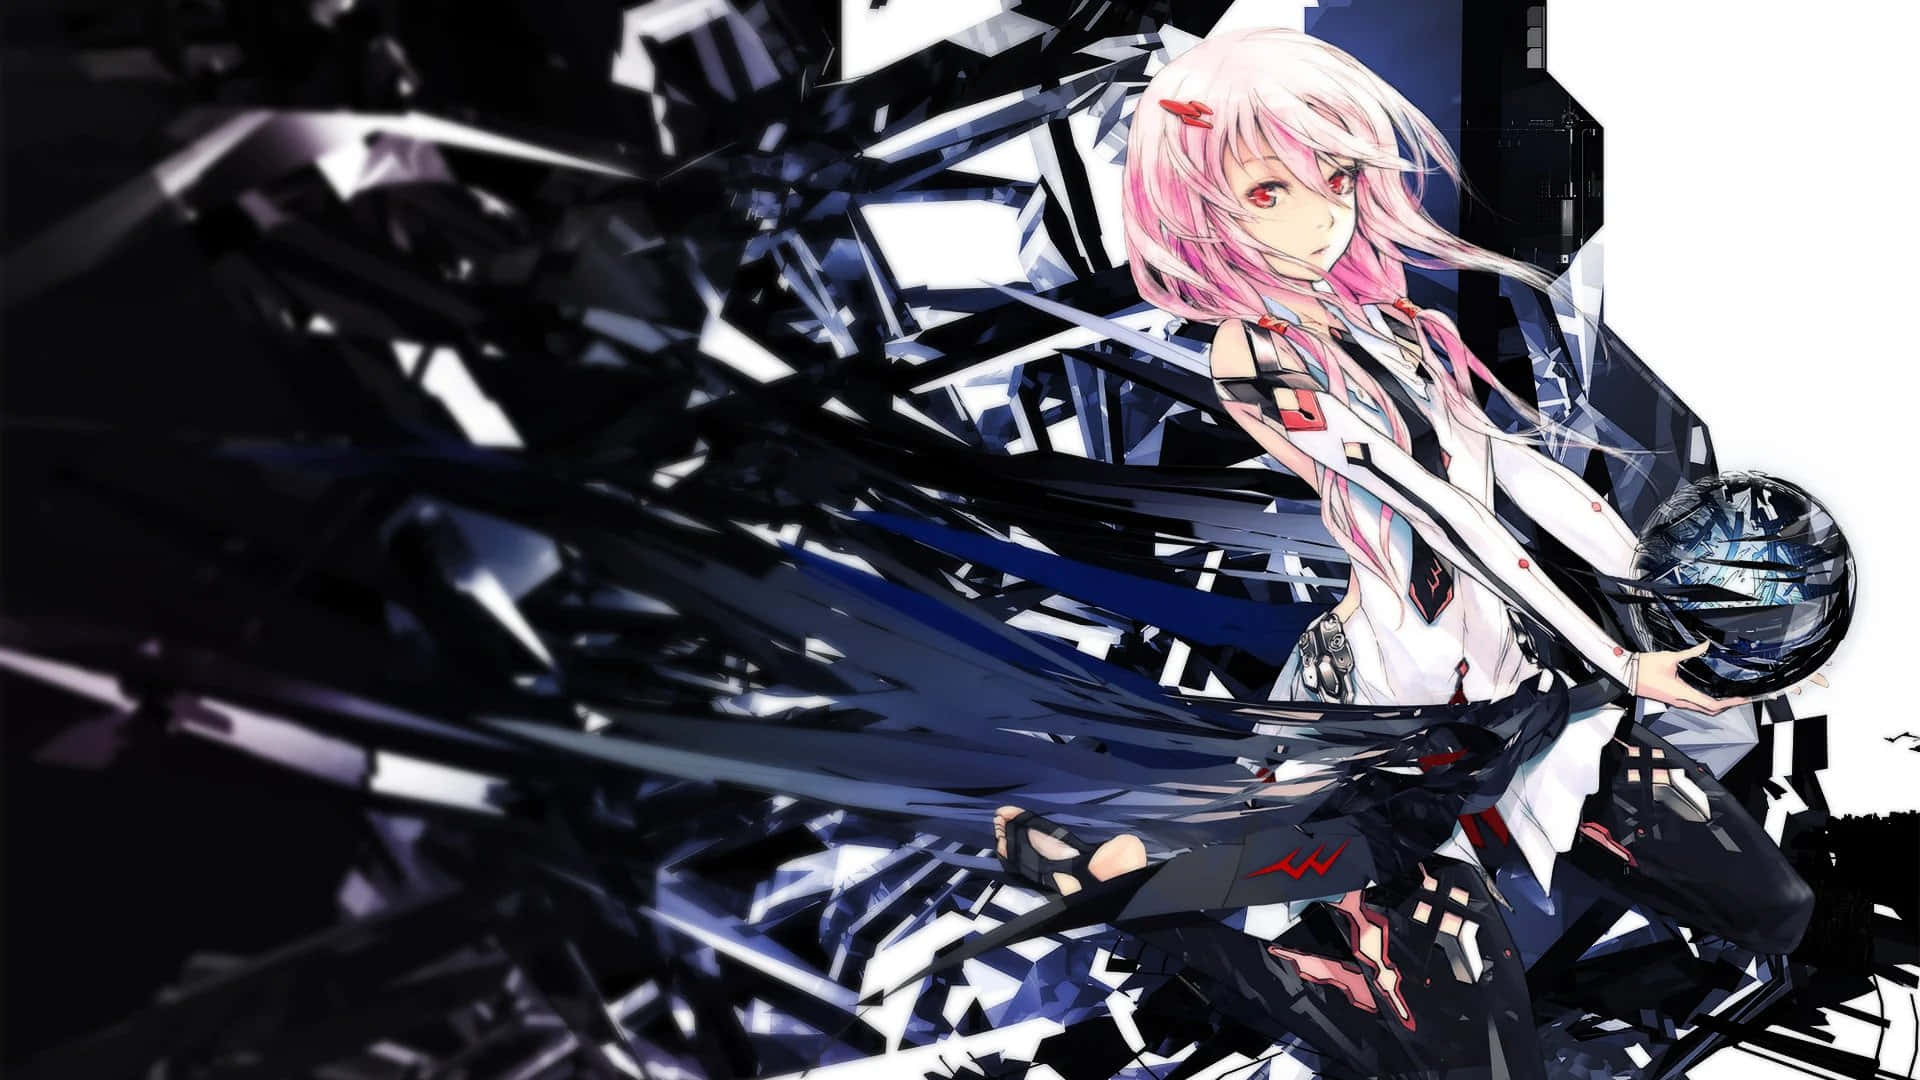 Download The World of Guilty Crown | Wallpapers.com